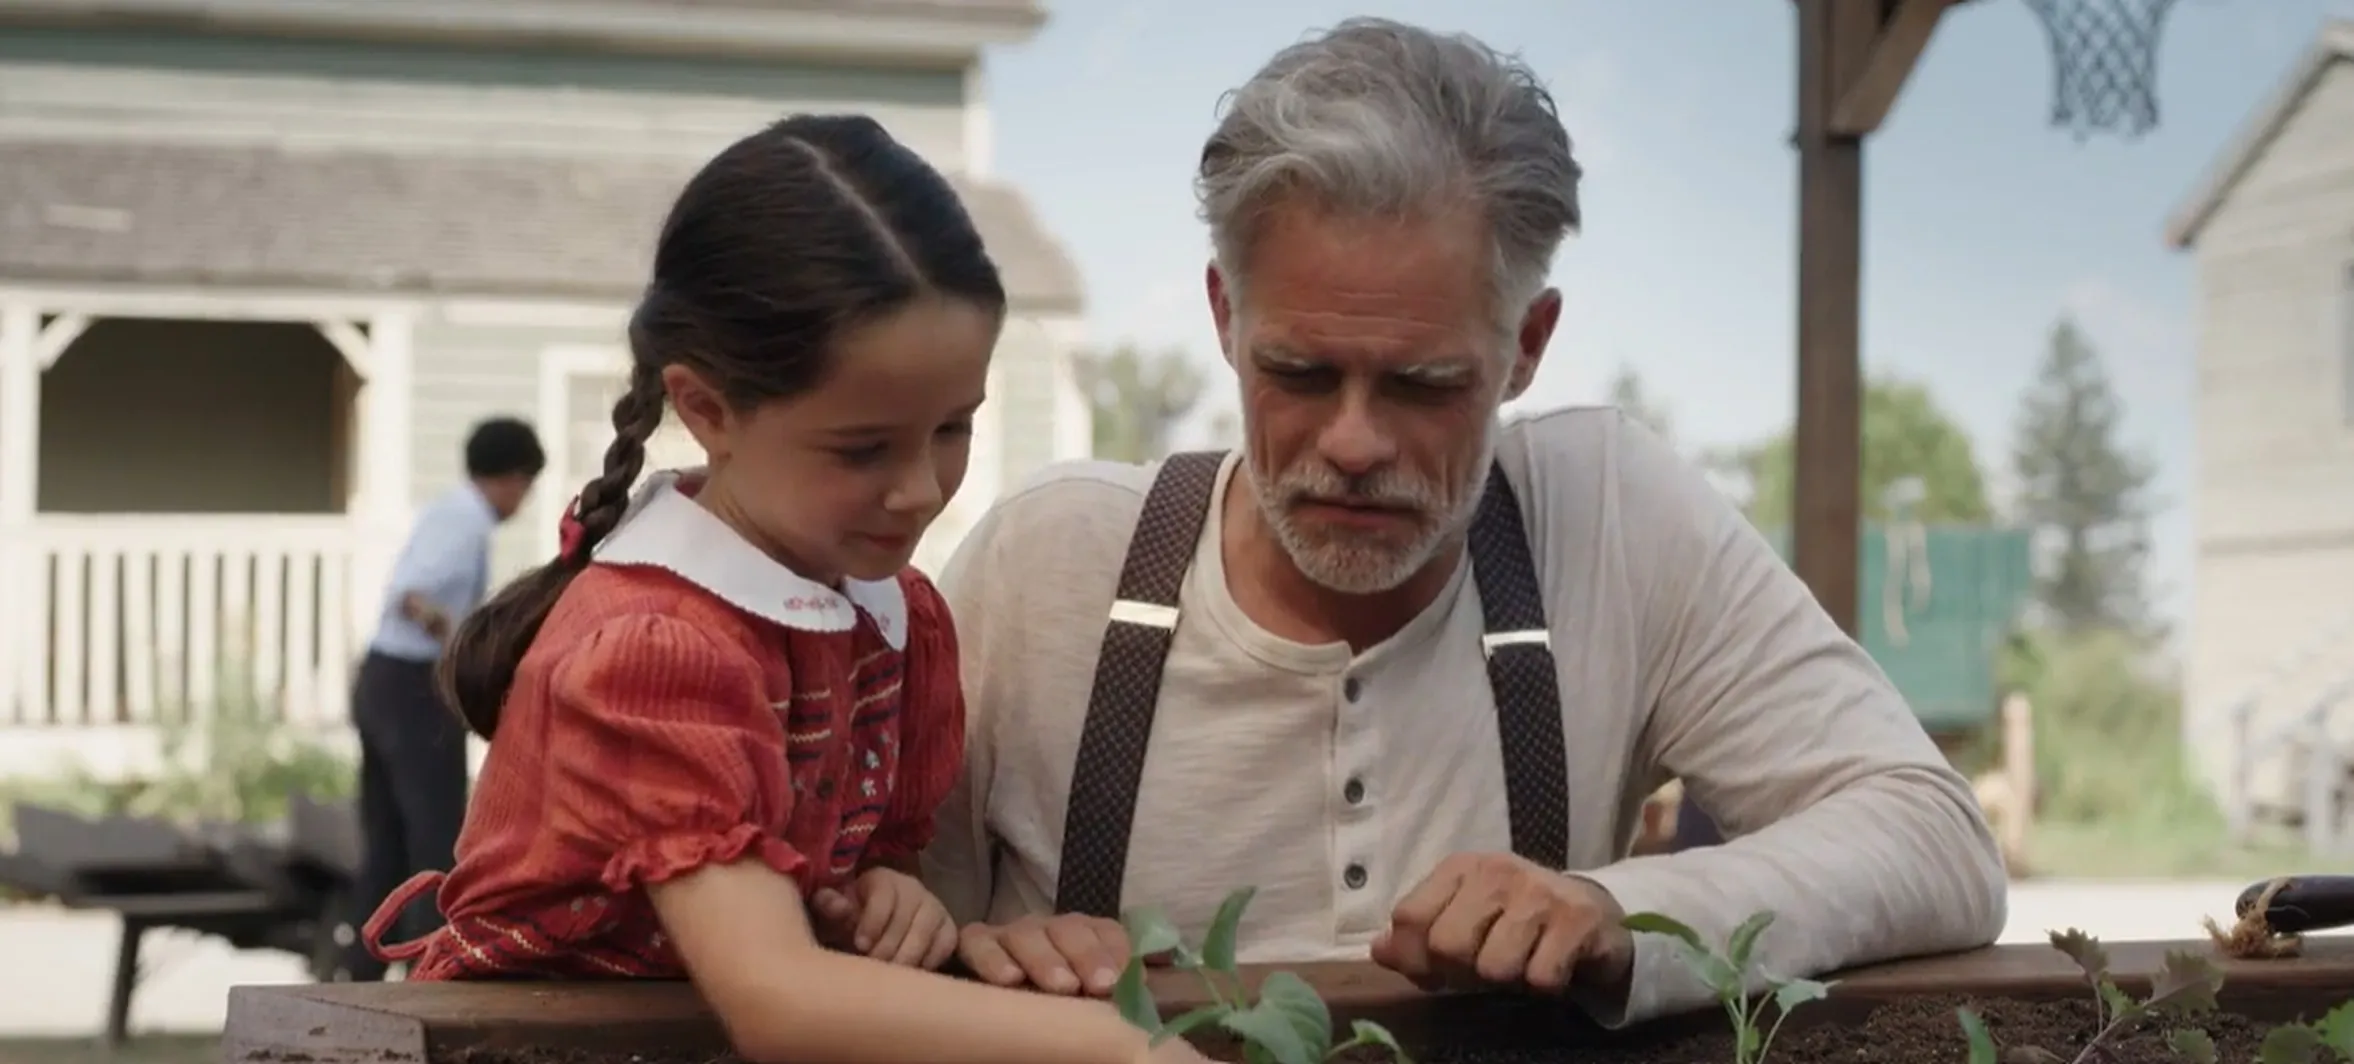 Henry helping the town kids in the recent episode of the show (Credits: Hallmark Channel)